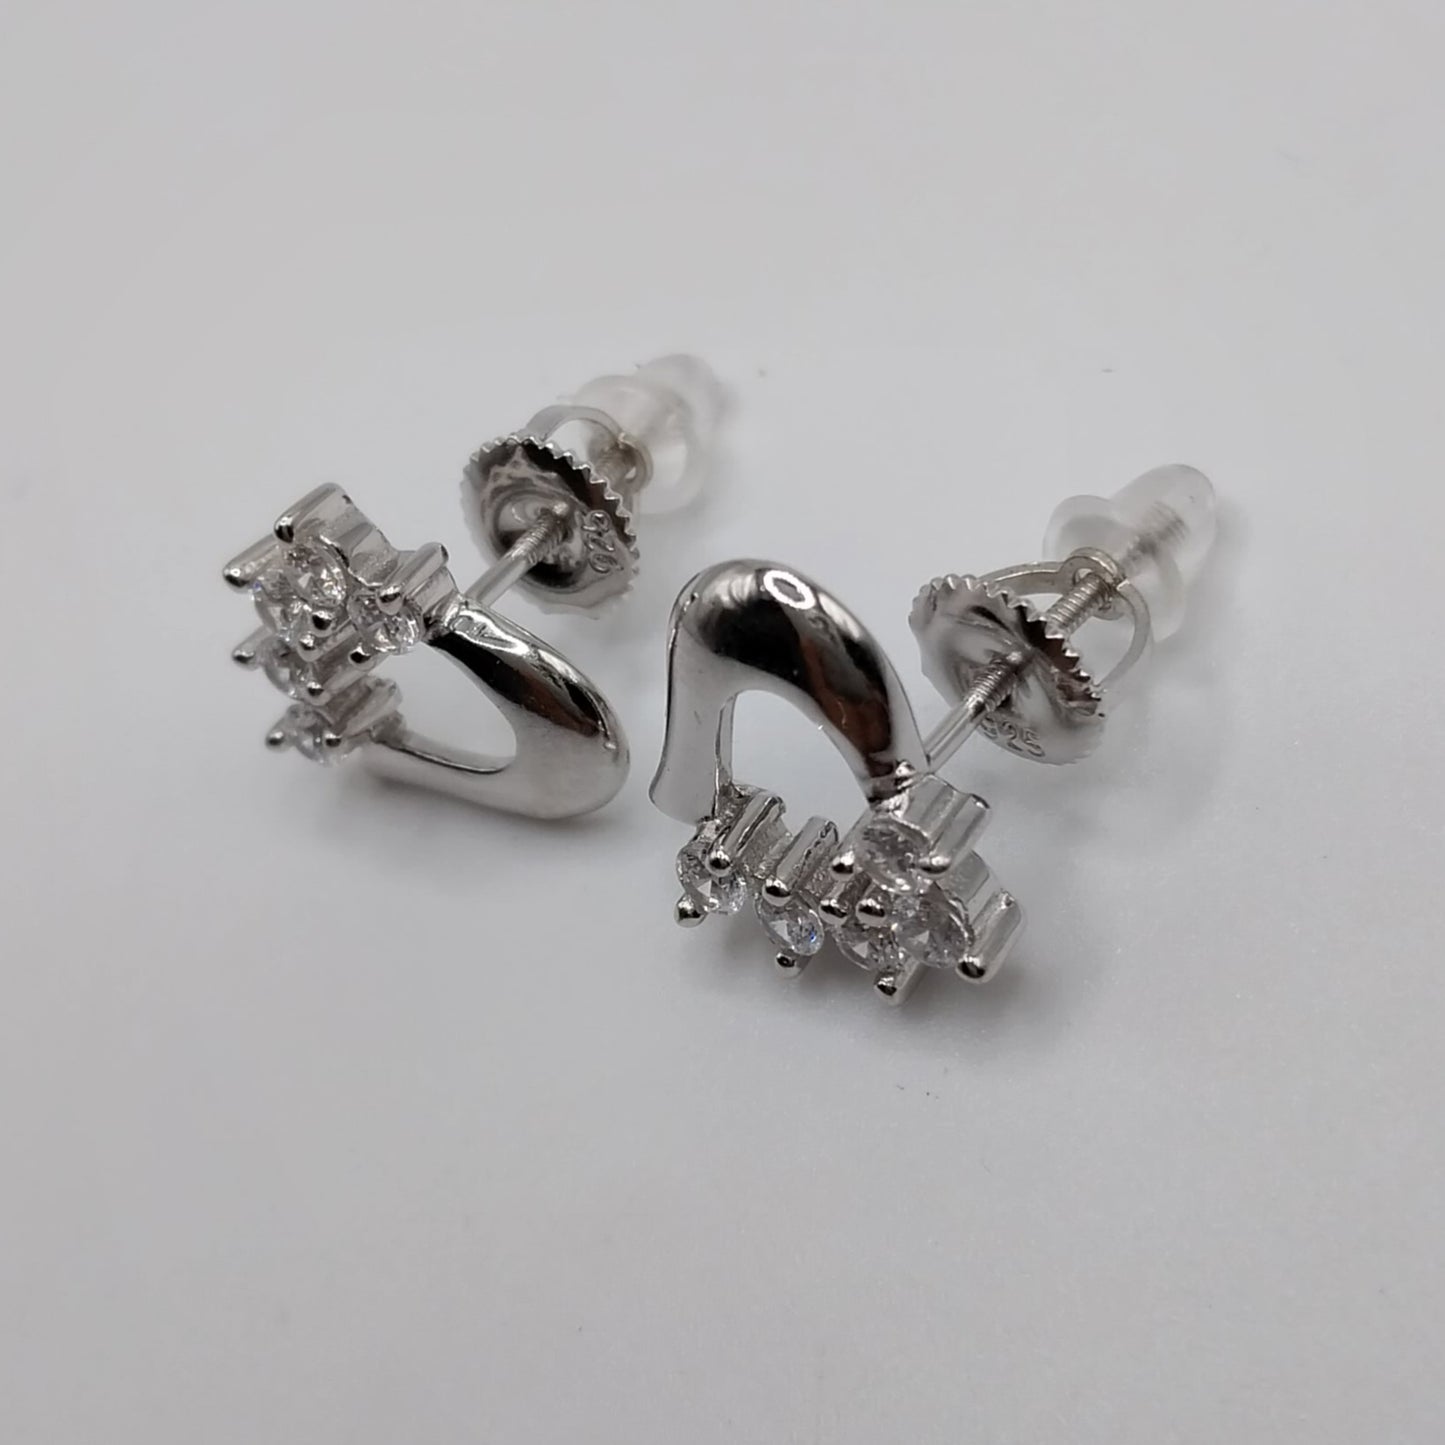 Silver Heart with White Cubic Zirconia Stones Stud Earrings